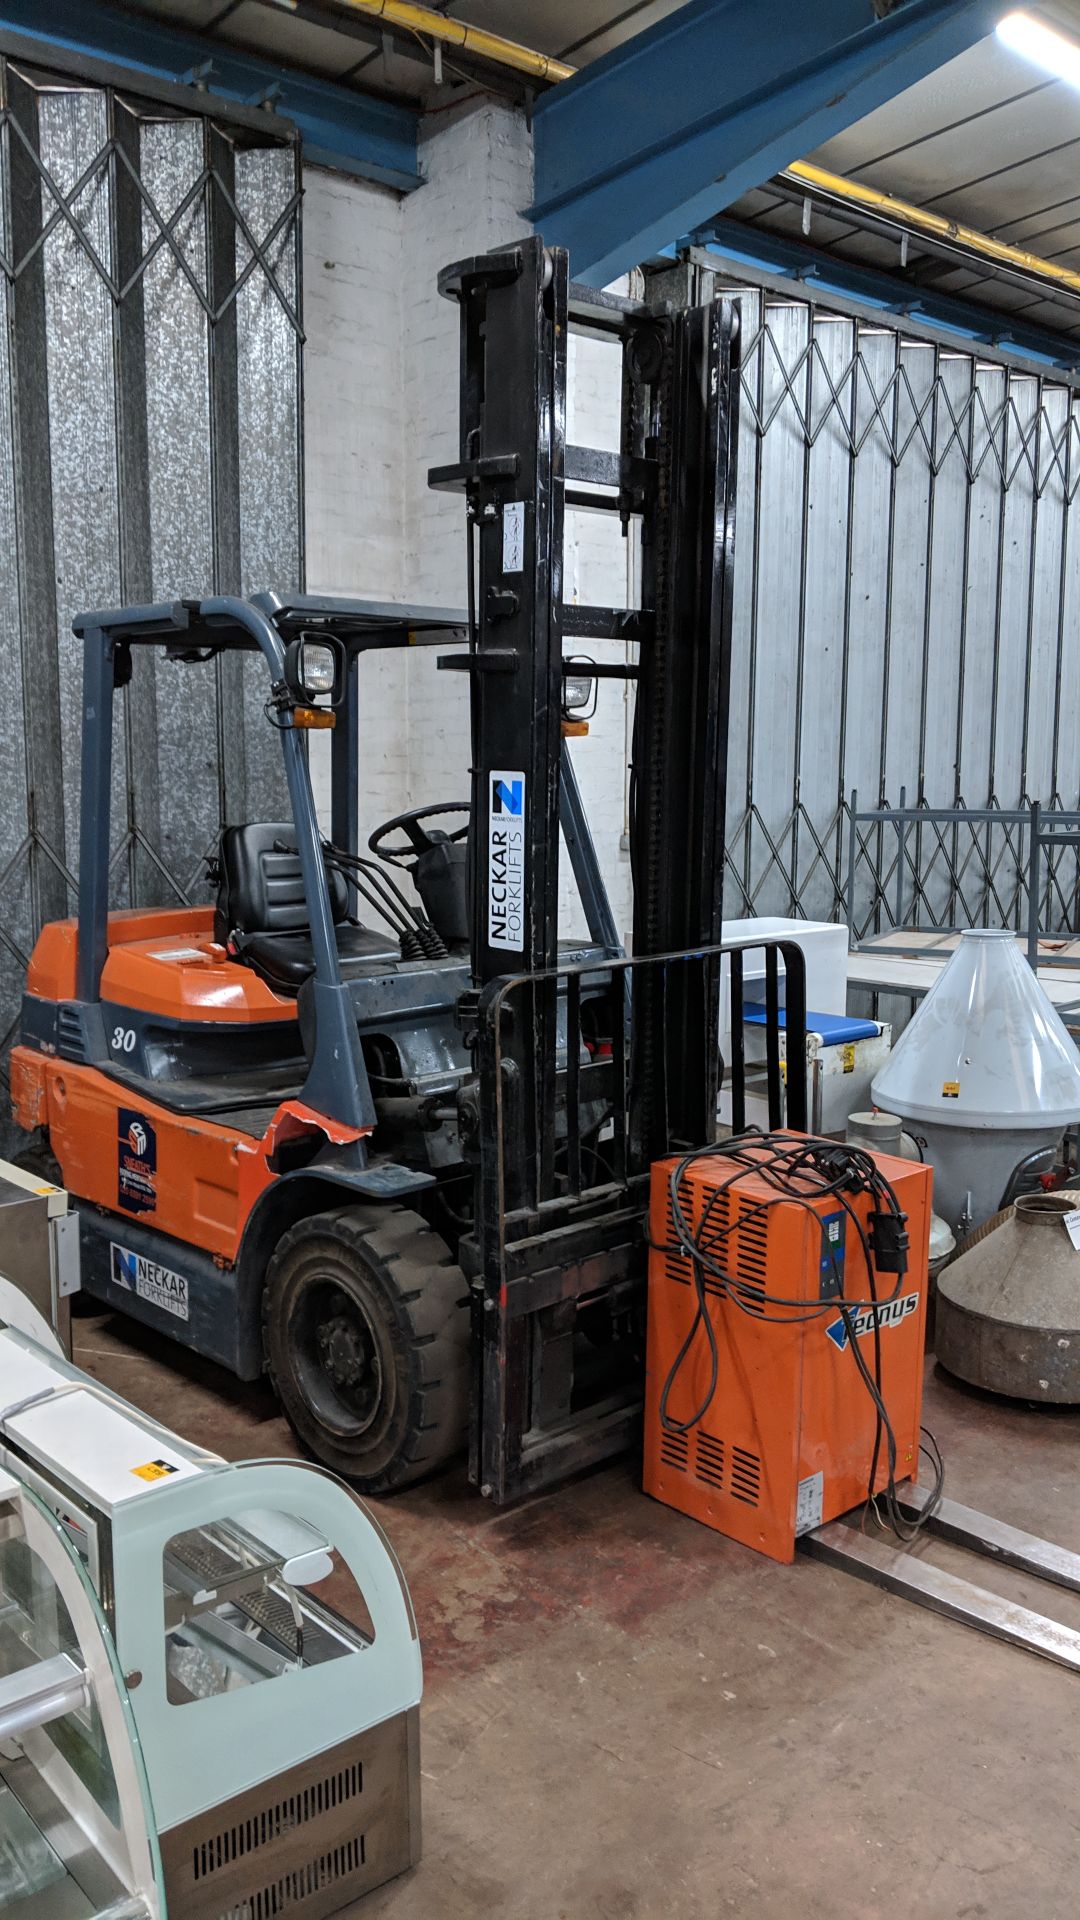 2005 Toyota electric forklift truck model 7FB30 with Cascade sideshift - Image 2 of 13